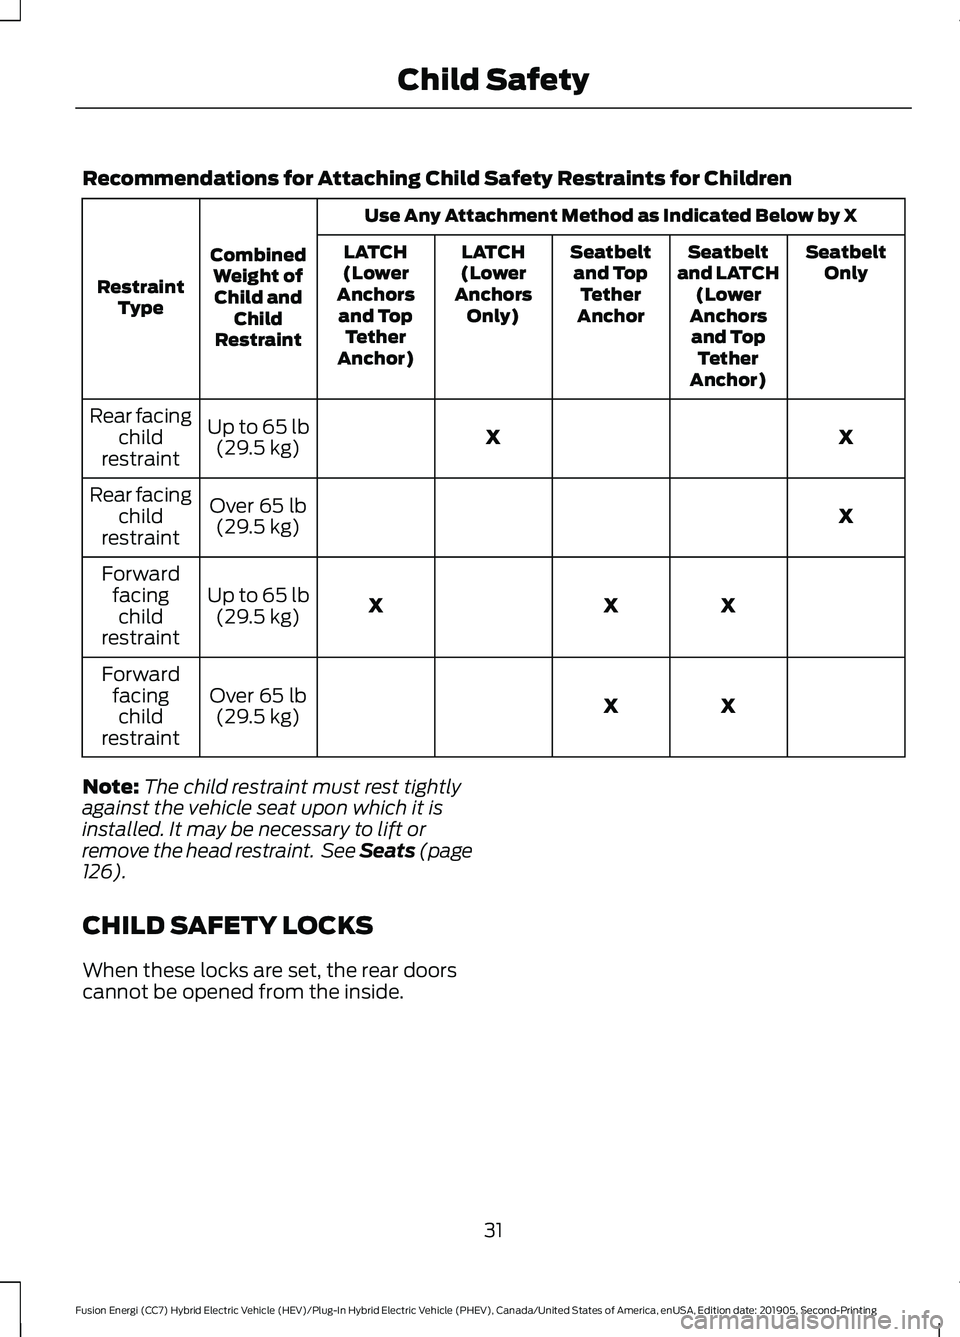 FORD FUSION ENERGI 2020  Owners Manual Recommendations for Attaching Child Safety Restraints for Children
Use Any Attachment Method as Indicated Below by X
Combined Weight ofChild and Child
Restraint
Restraint
Type Seatbelt
Only
Seatbelt
a